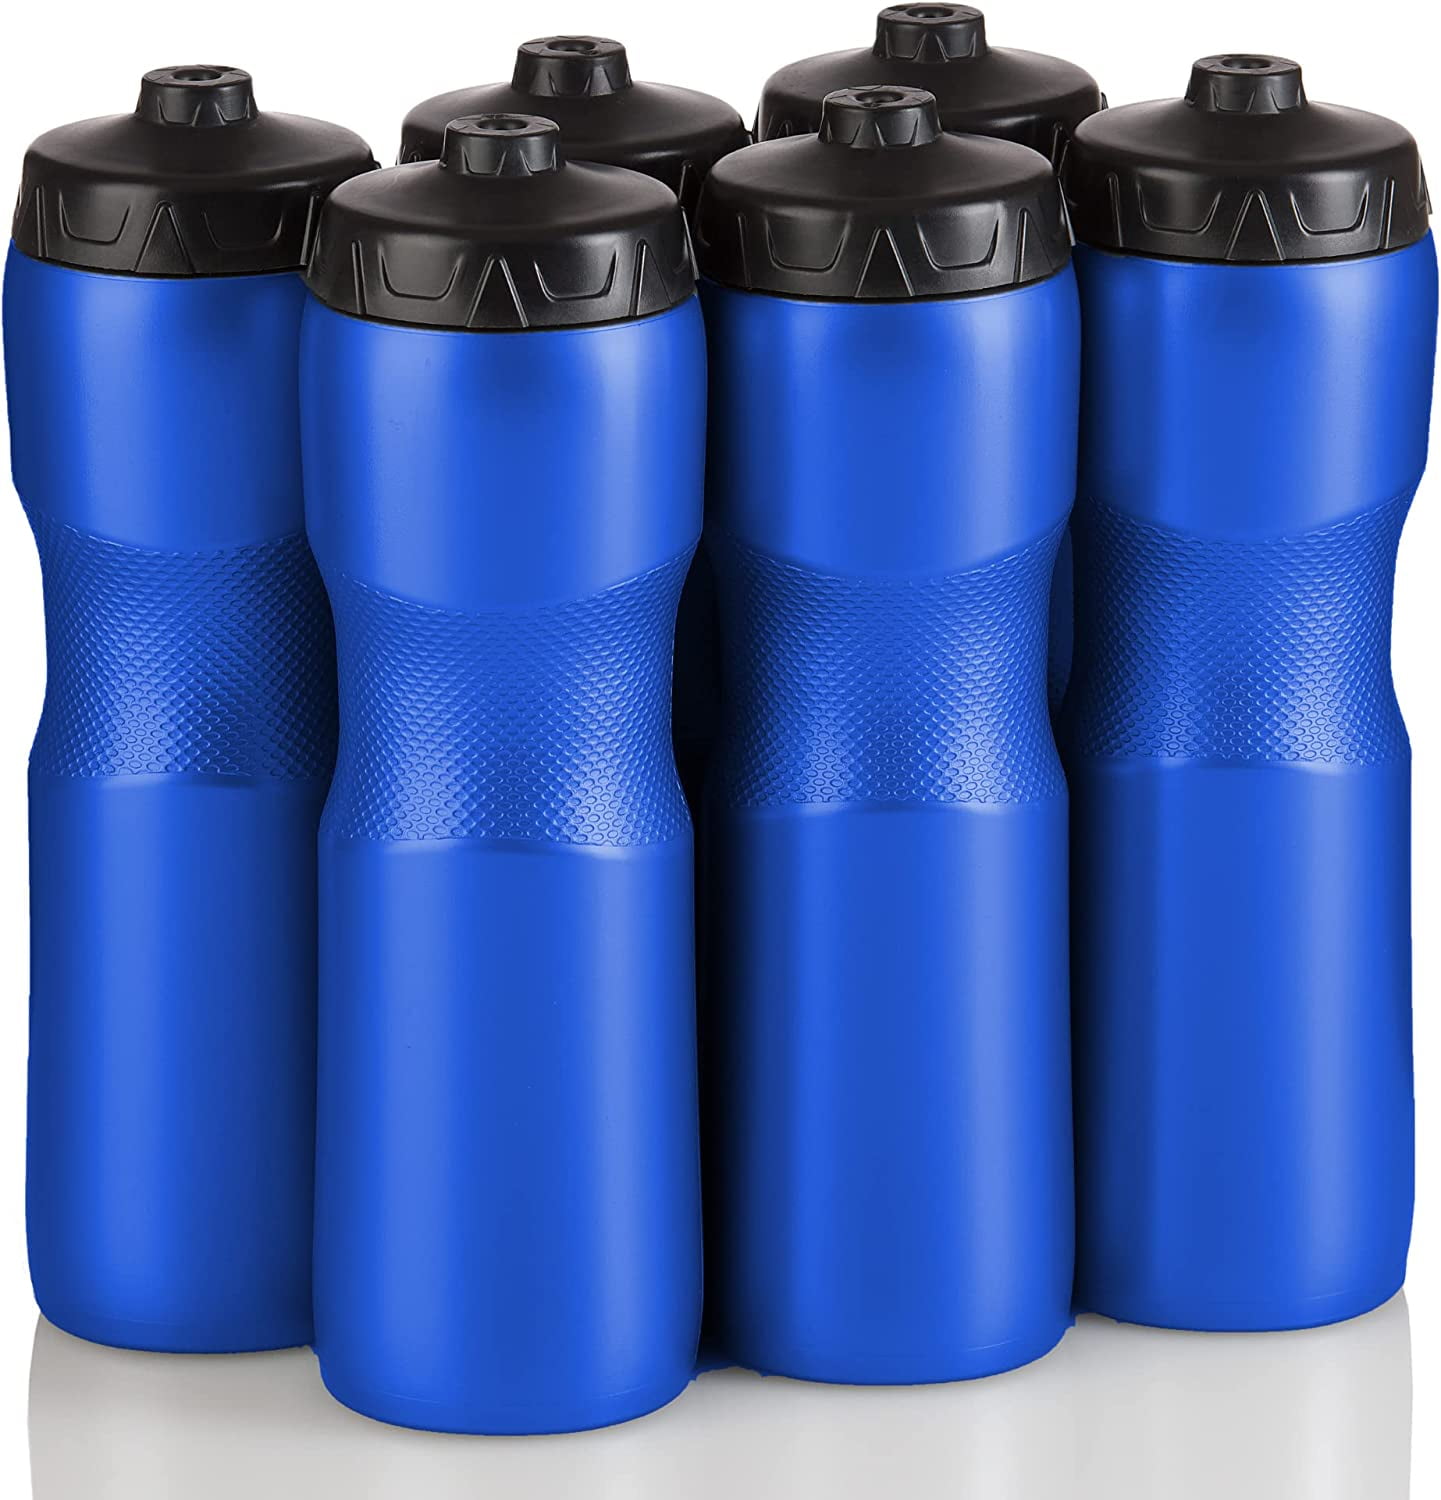 50 Strong 6-Pack of Sports Squeeze Water Bottles - 22 oz. BPA Free Bike & Sport  Bottle with Easy Open Push/Pull Cap – Made in US